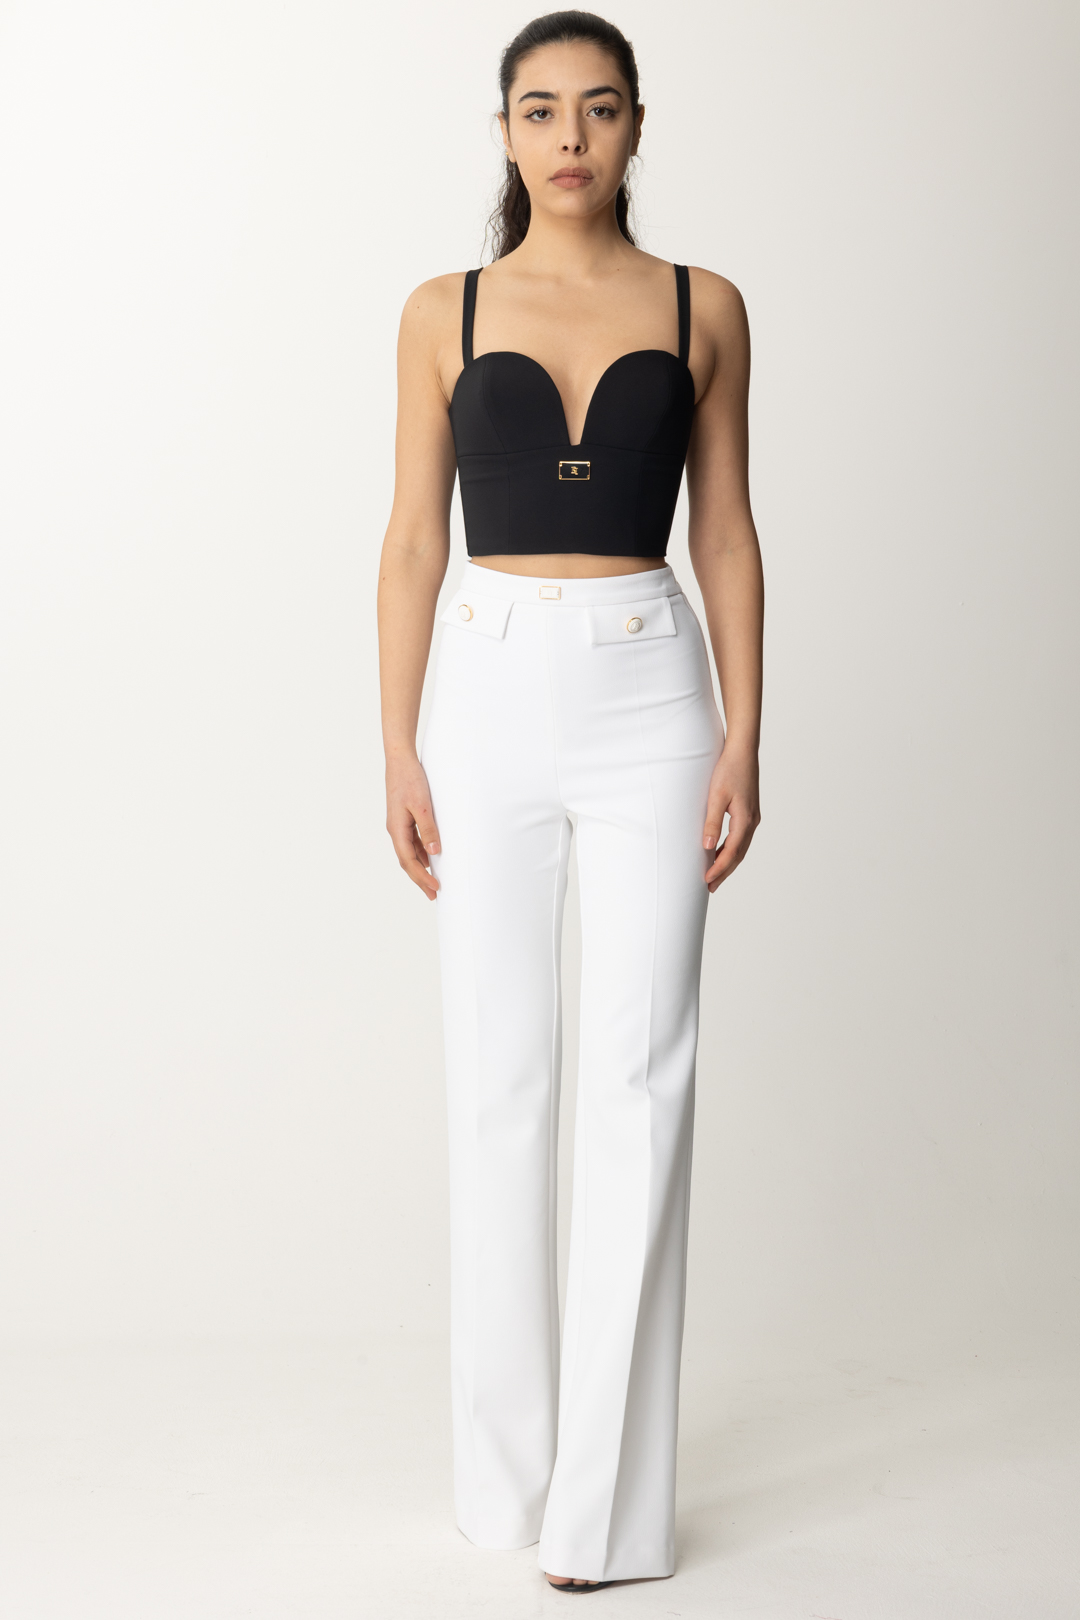 Preview: Elisabetta Franchi Cropped bustier top with enameled plate Nero